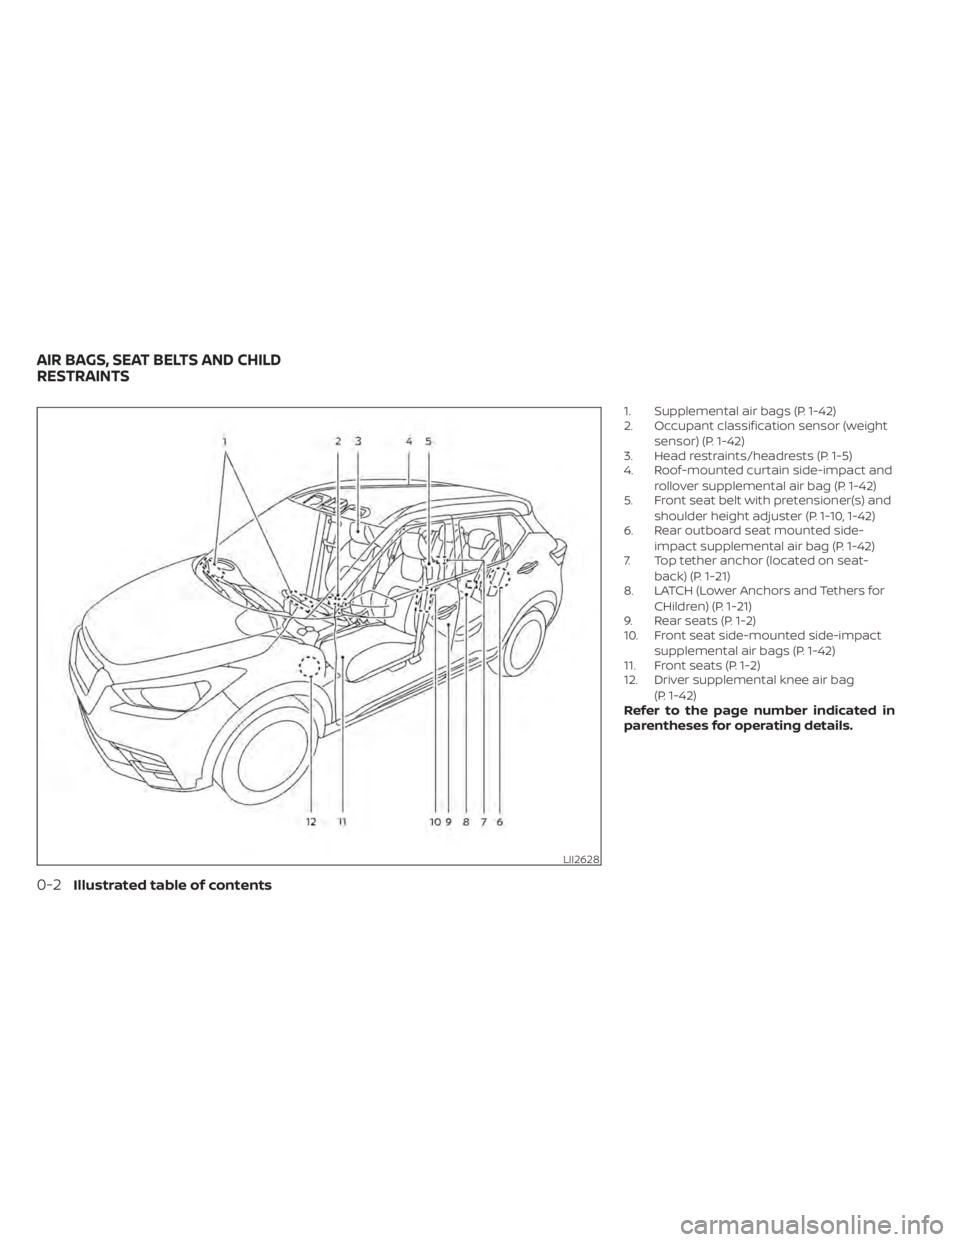 NISSAN KICKS 2021  Owners Manual 1. Supplemental air bags (P. 1-42)
2. Occupant classification sensor (weightsensor) (P. 1-42)
3. Head restraints/headrests (P. 1-5)
4. Roof-mounted curtain side-impact and
rollover supplemental air ba